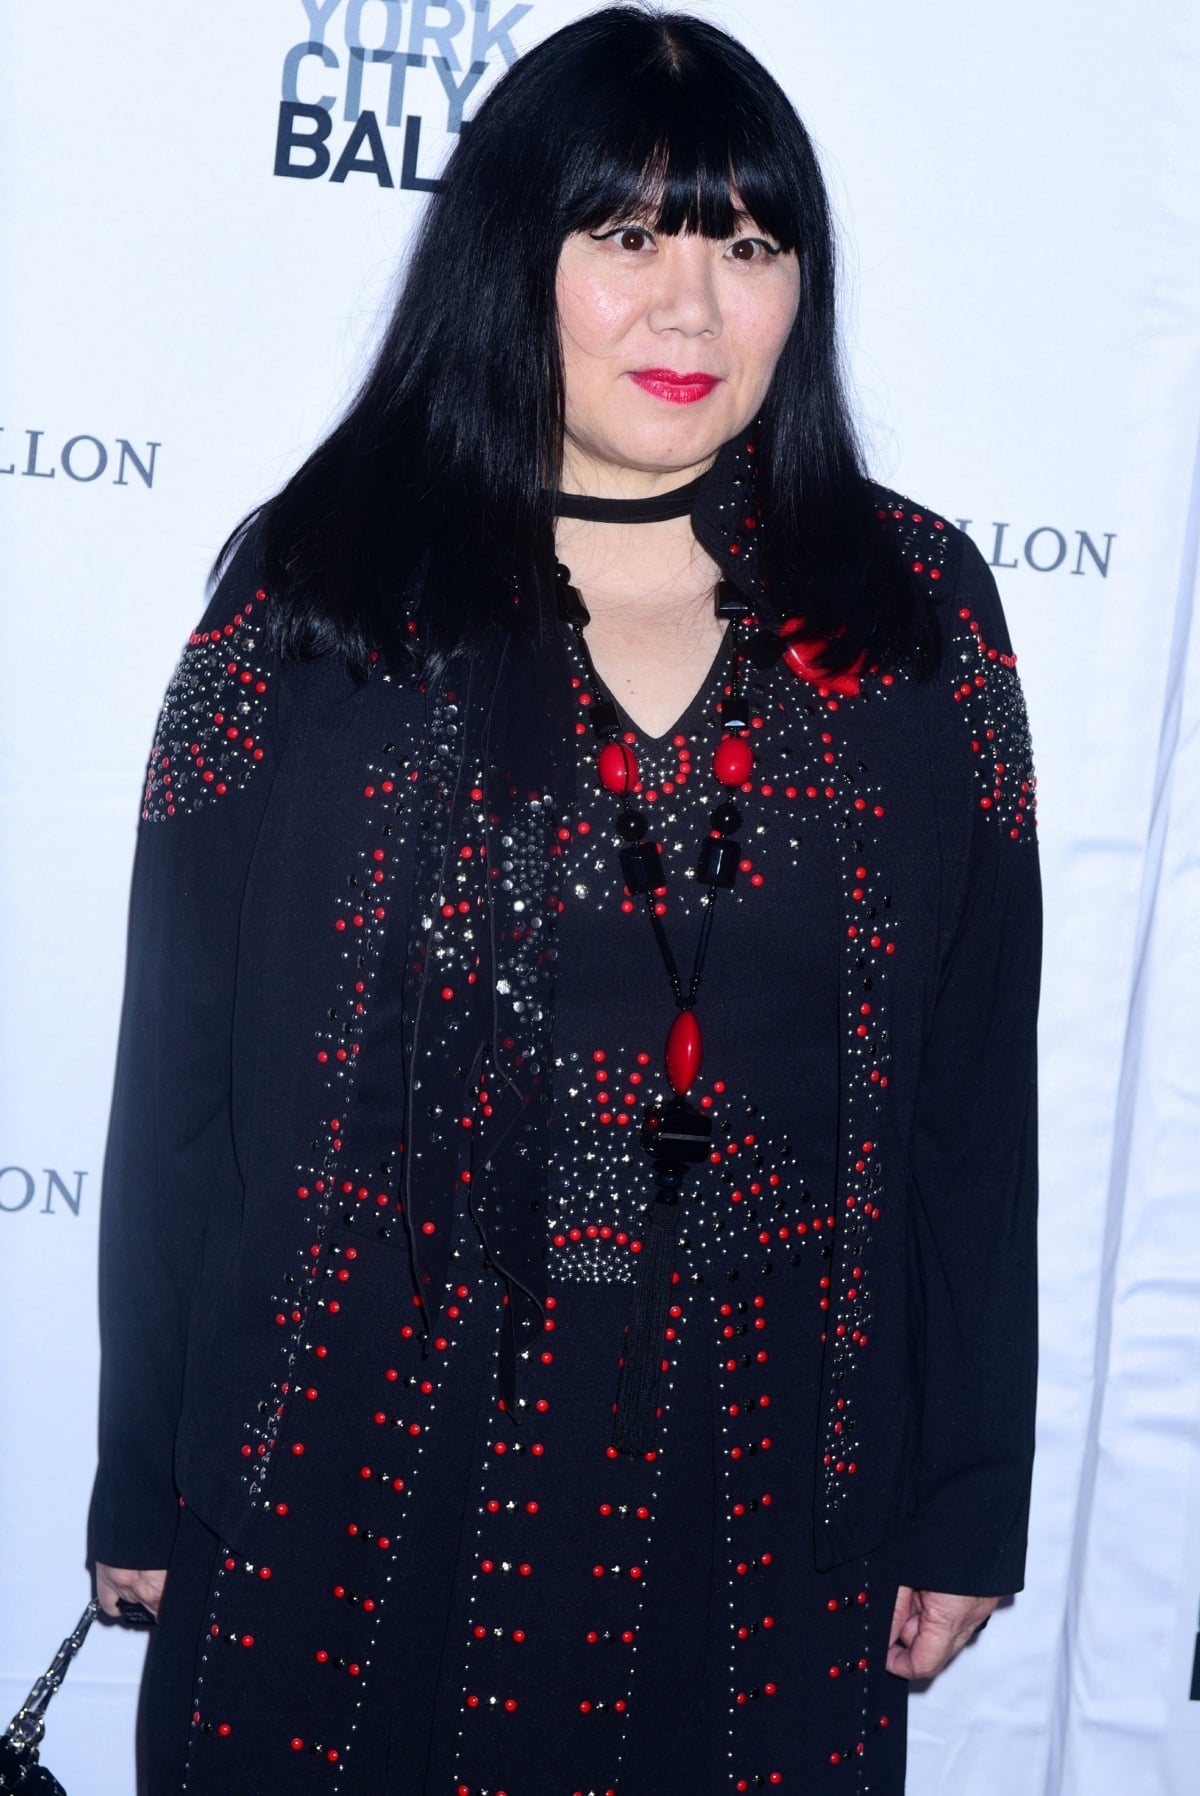 Anna Sui attending the 8th Annual New York City Ballet Fall Fashion Gala